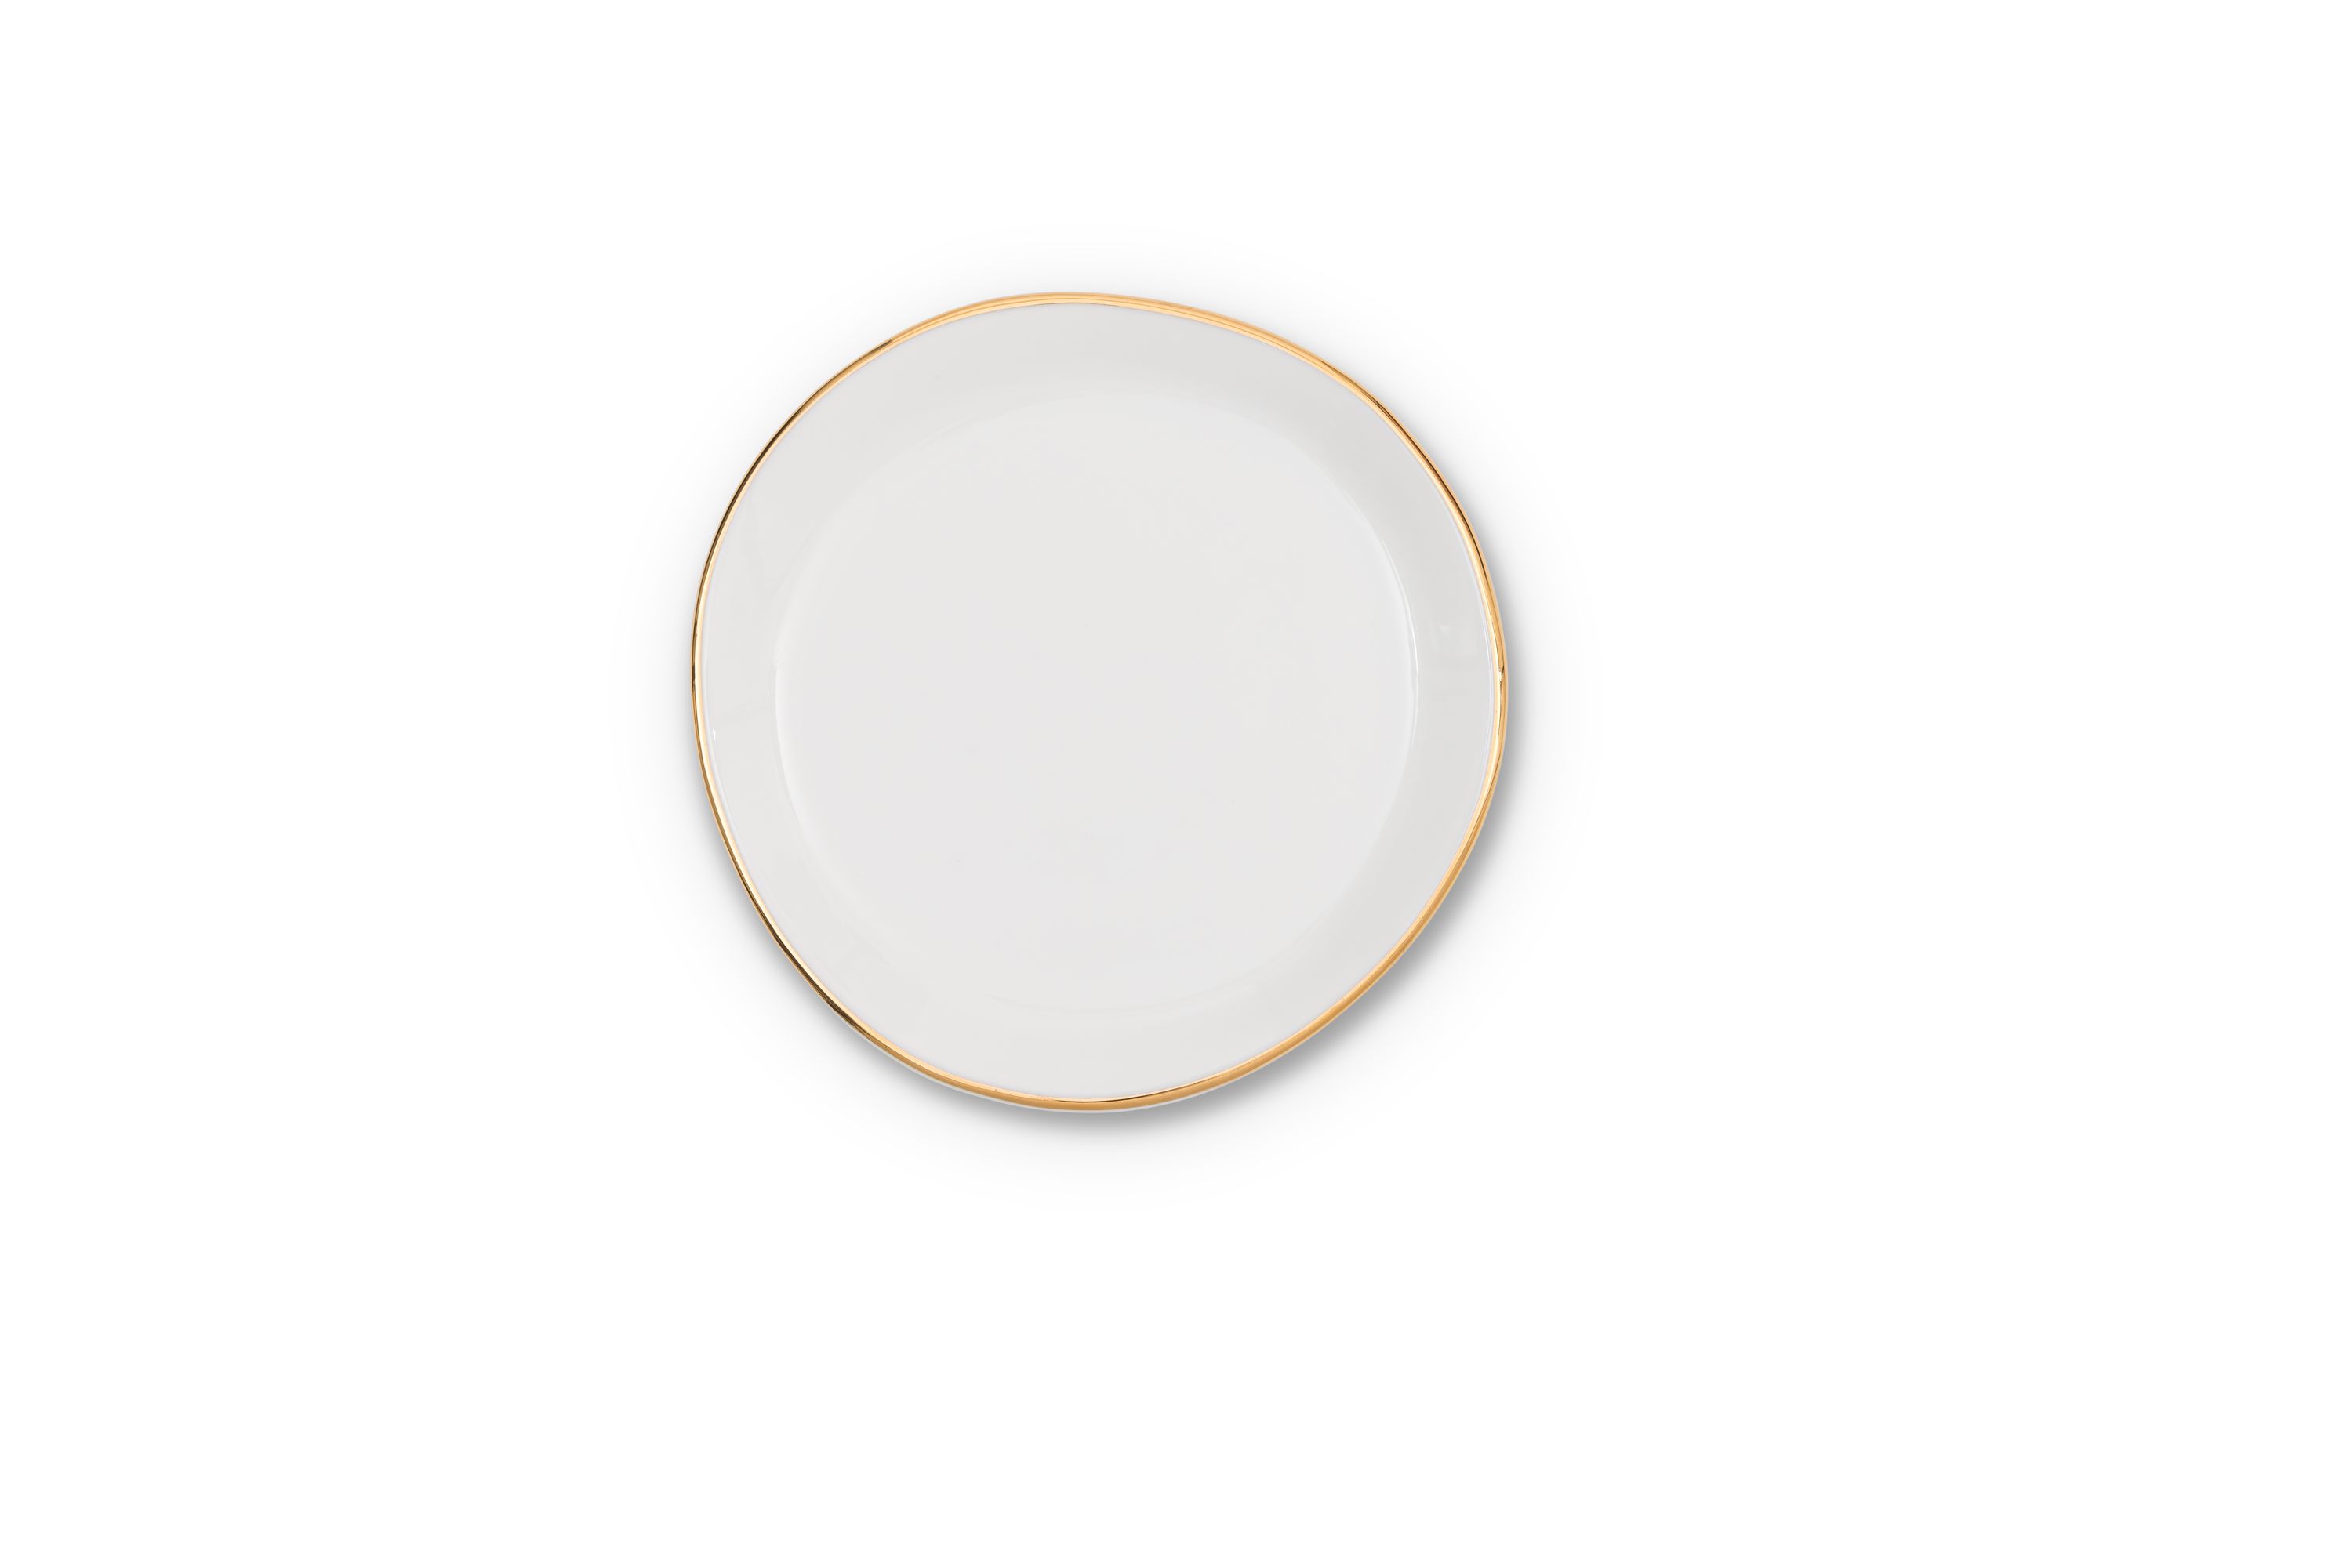 Unc Good Morning Plate Small Morning White Gift